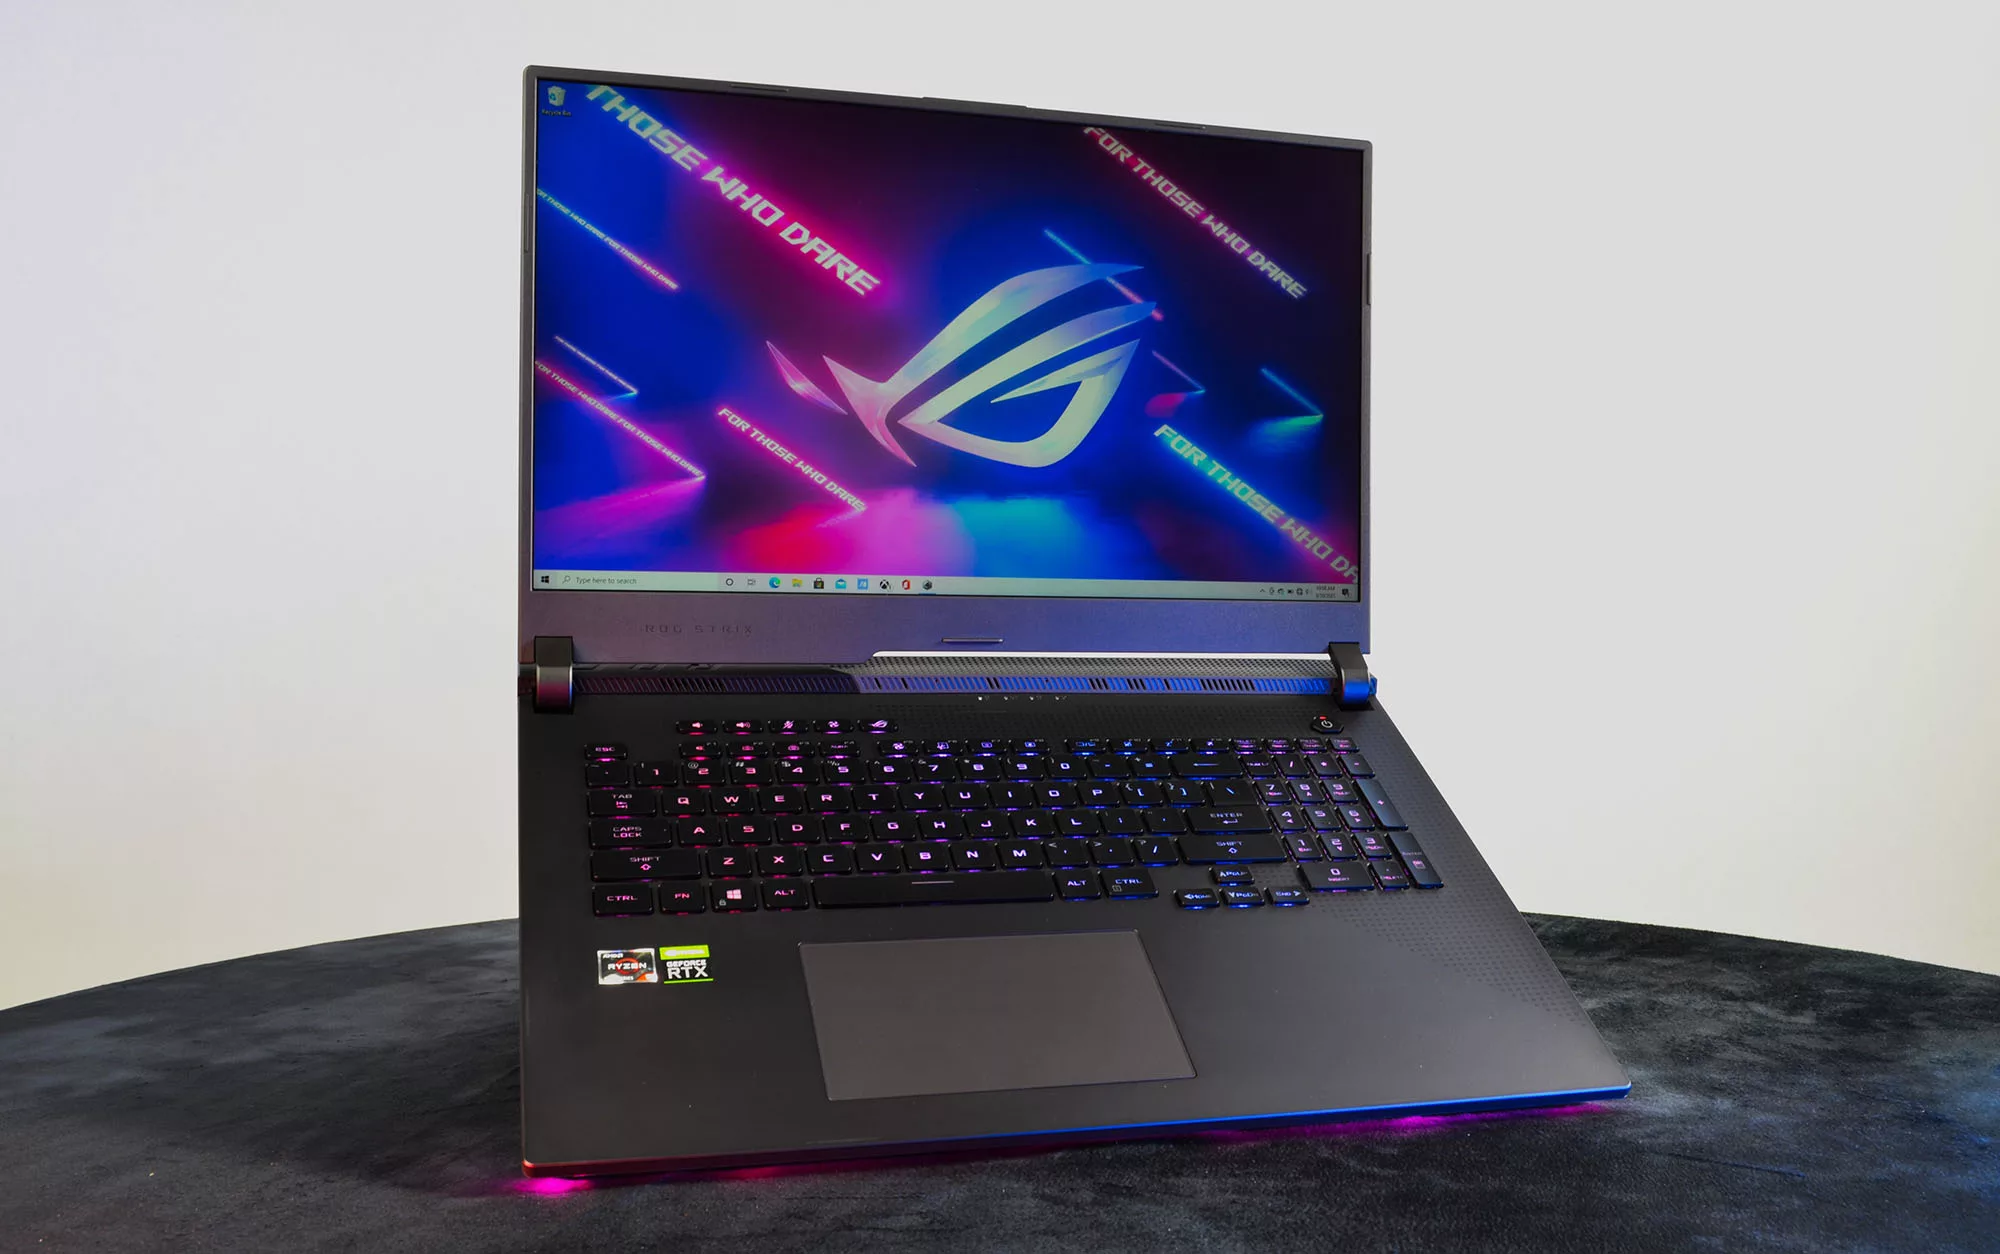 ROG Strix G17 with lid open and illuminated with purple RGB, emphasis on the screen and keyboard.